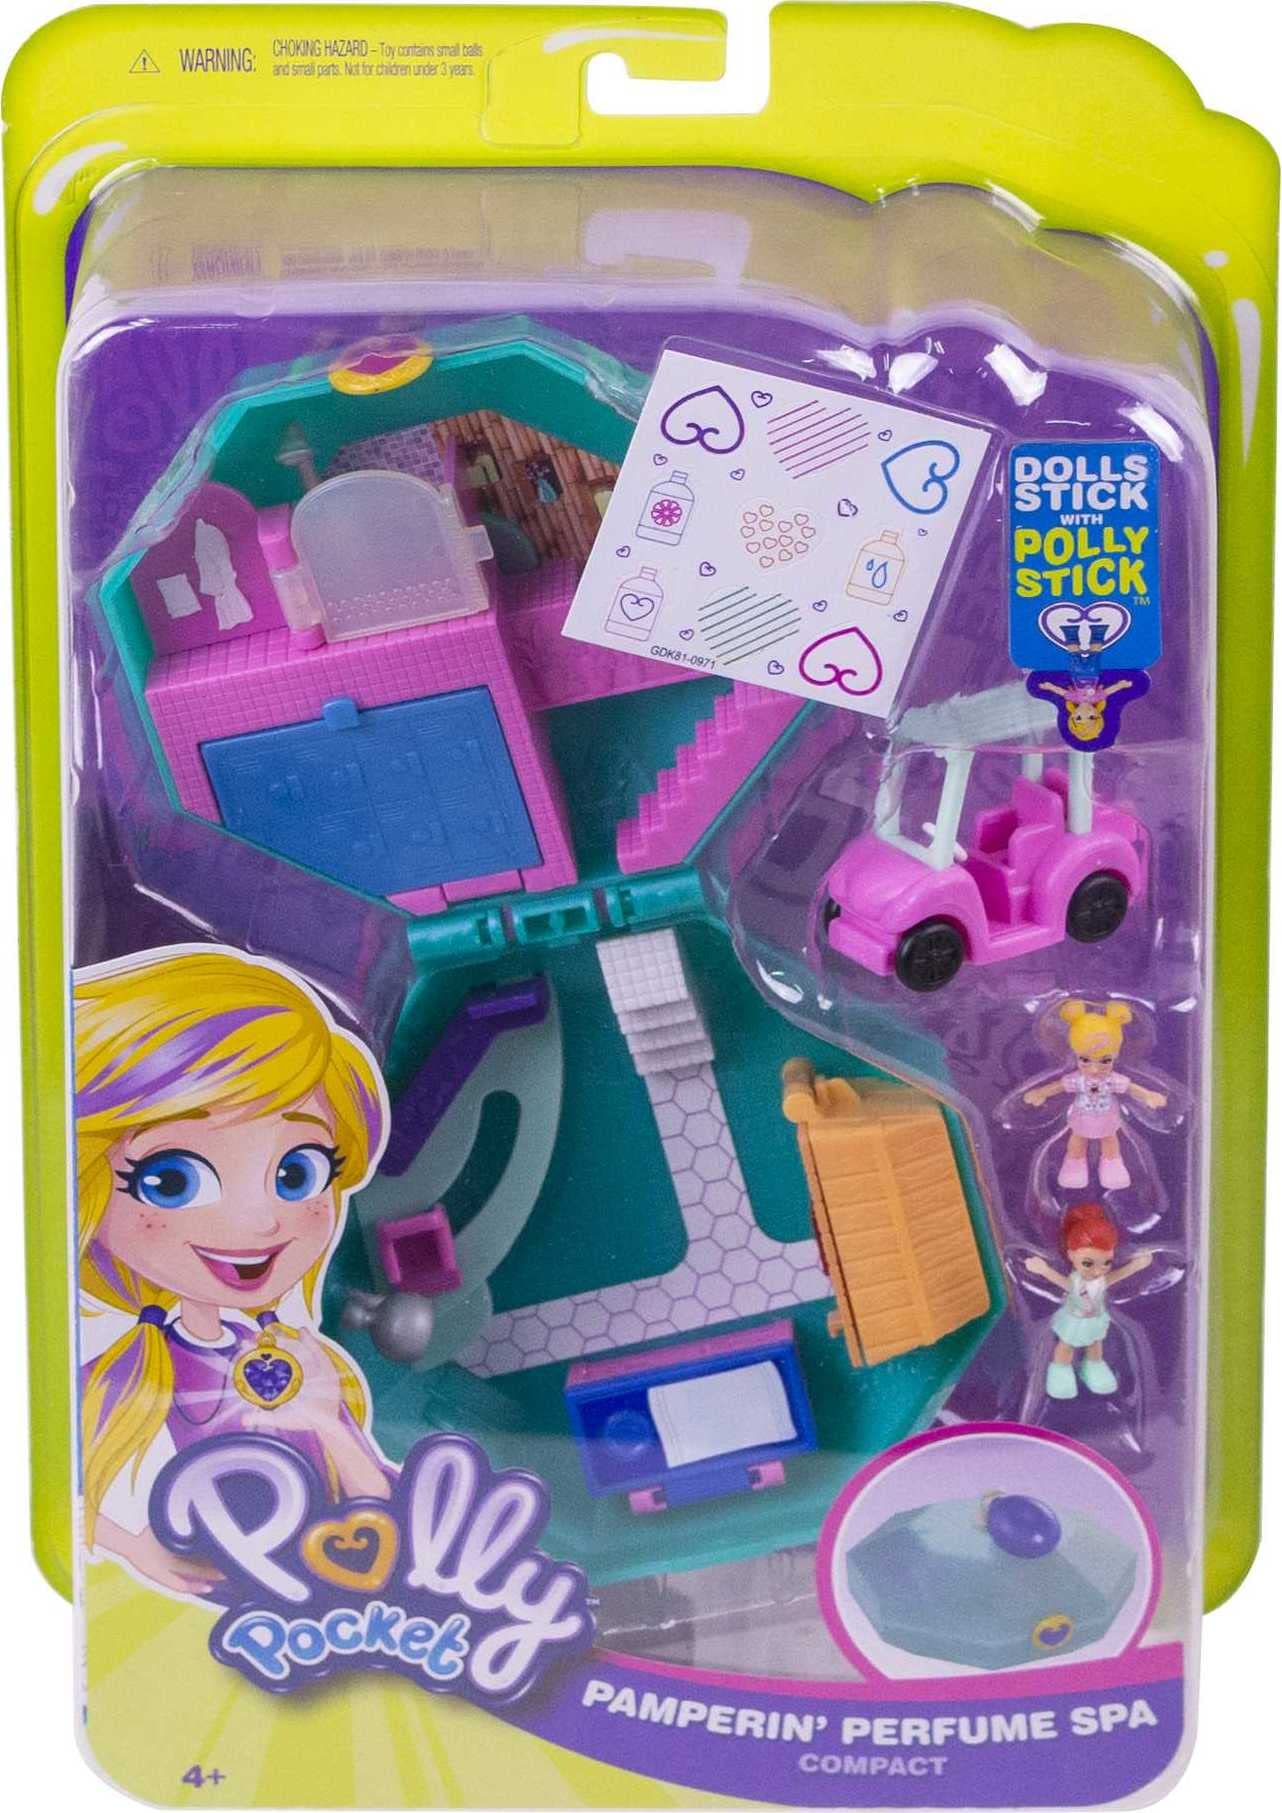 Polly Pocket Playset, Travel Toy with 2 Micro Dolls, Toy Car & Surprise Accessories, Pamperin Perfume Spa Compact